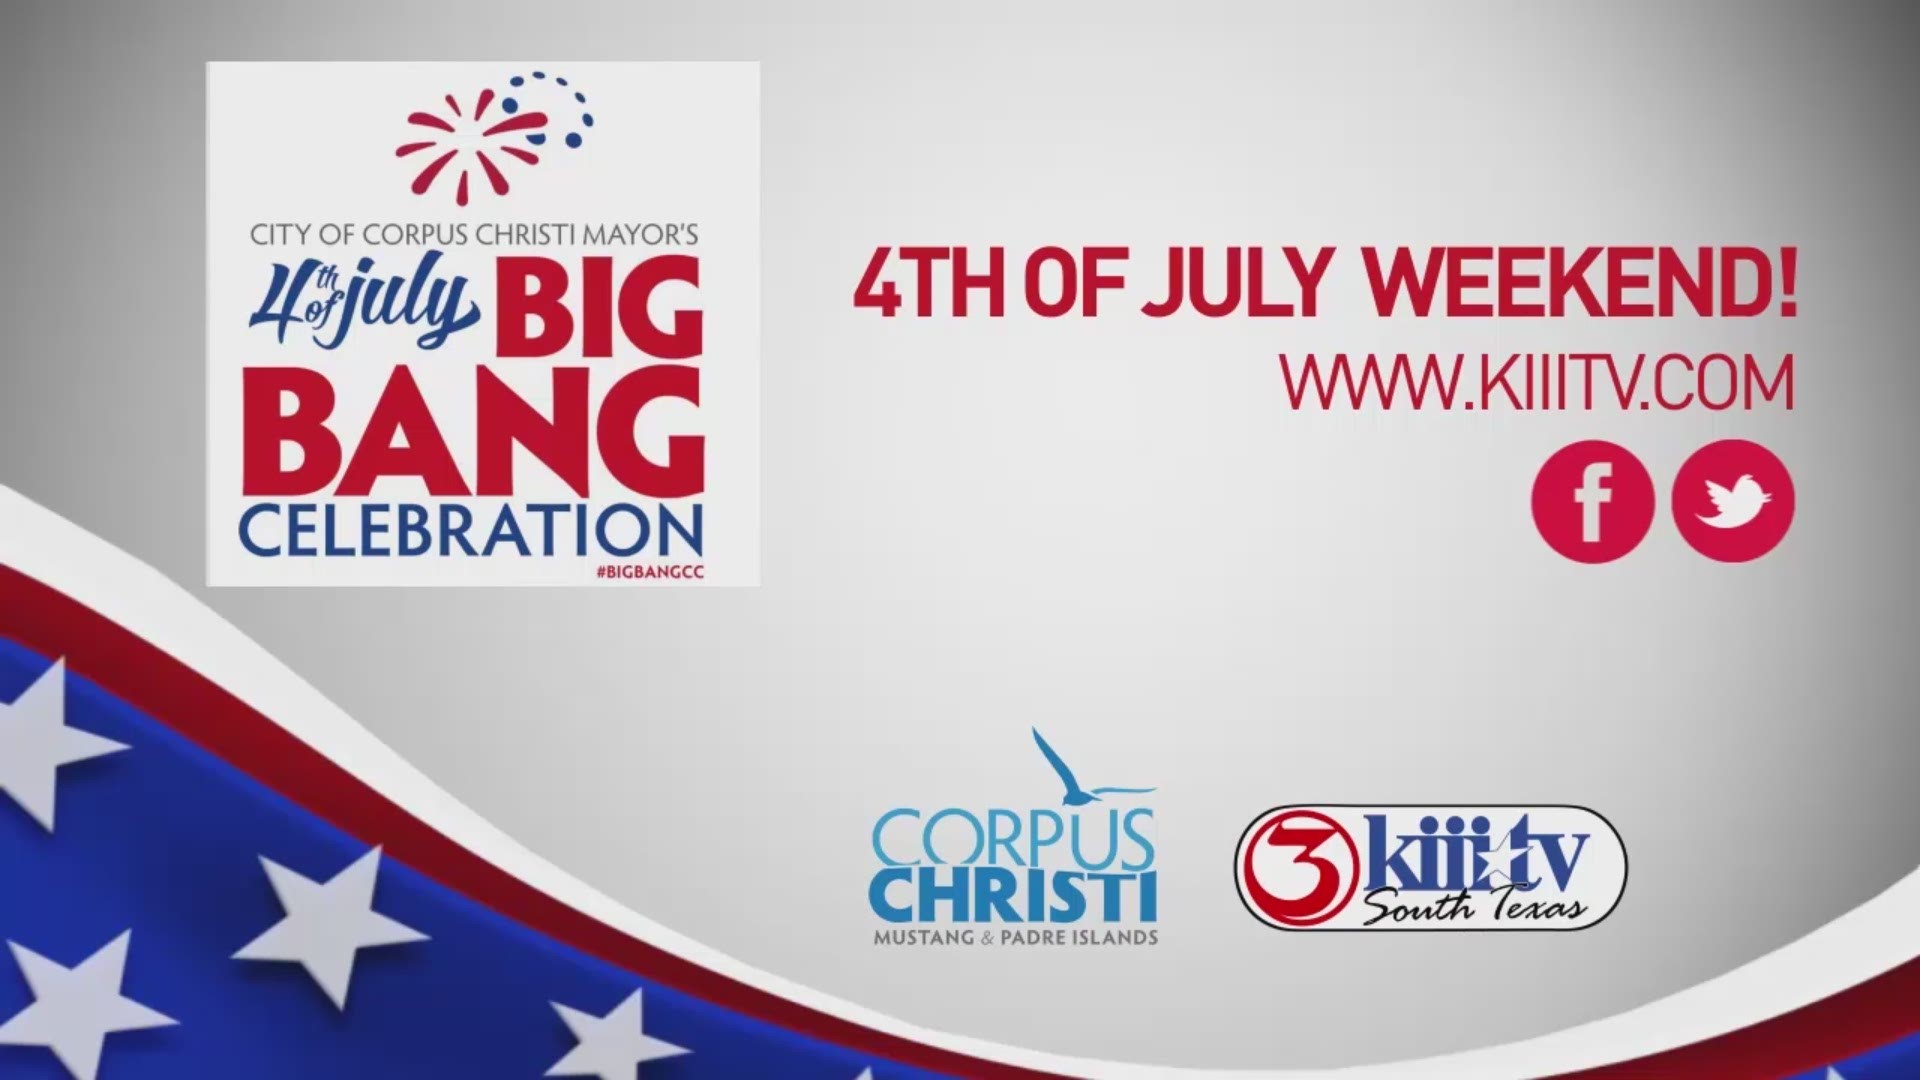 During the Big Bang Celebration, there will be live music, fantastic art to anglers, and fireworks.